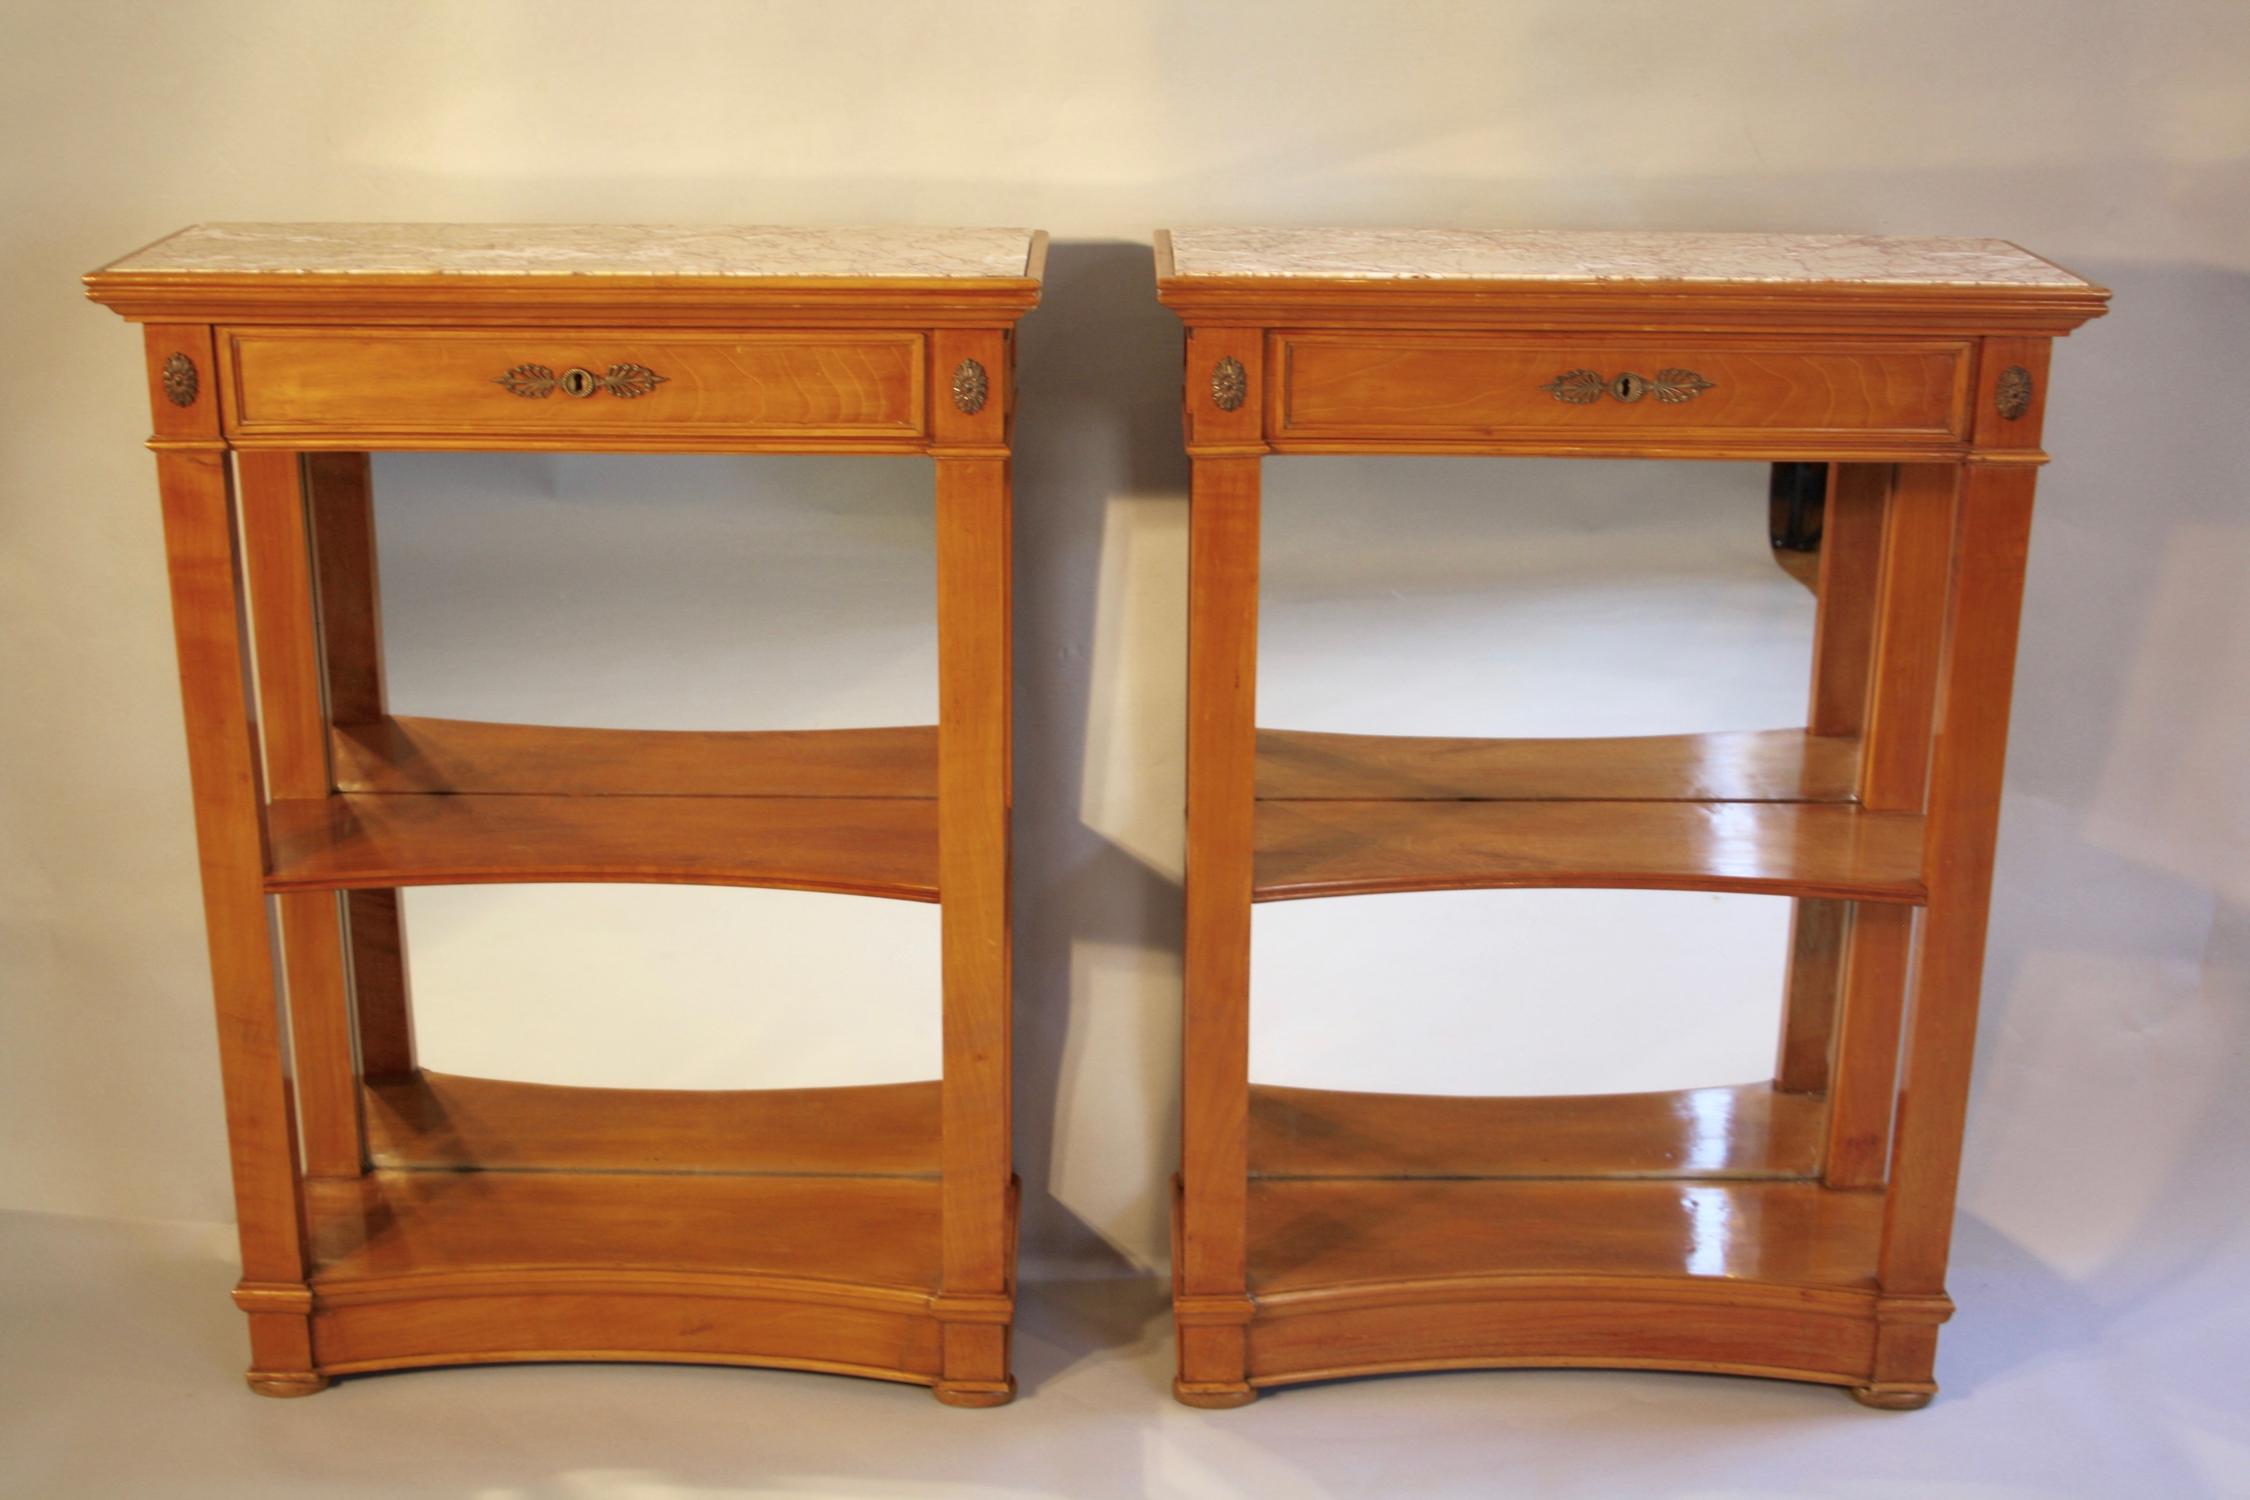 Pair of cherry wood bookcases